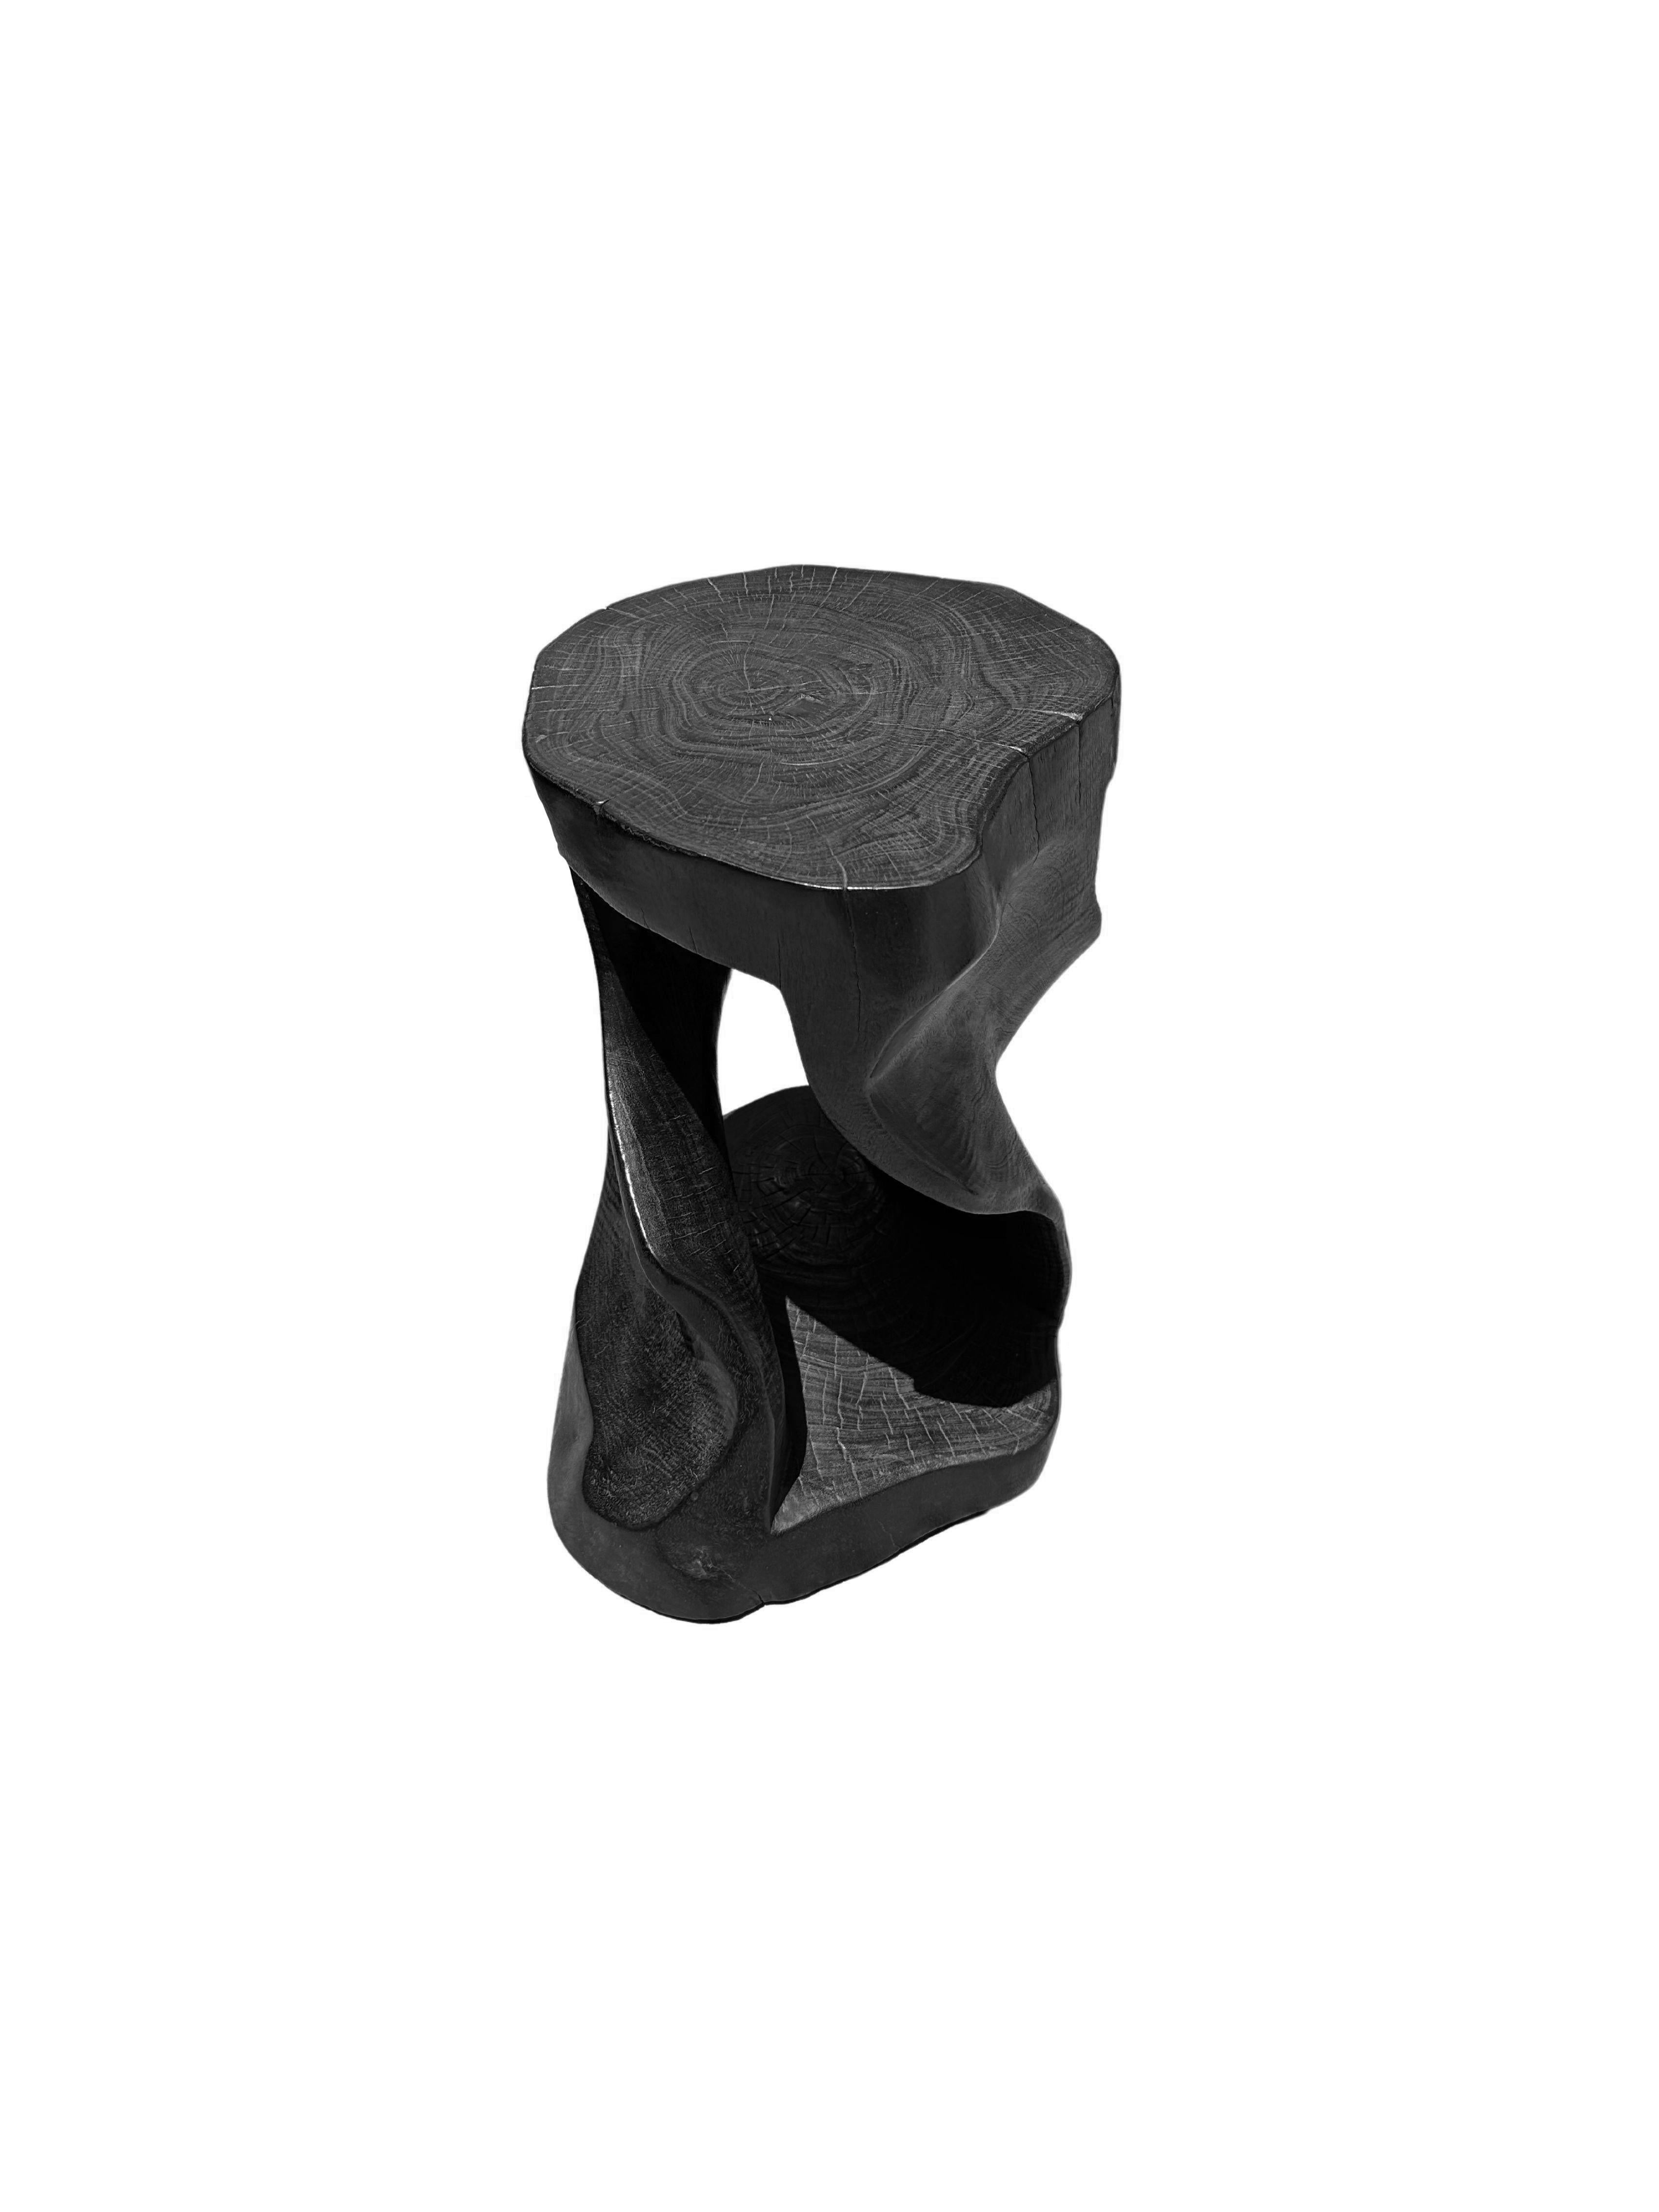 A wonderfully sculptural stool or side table, with a mix of wood textures and shades. It features a spiral design, with an exposed core. A uniquely sculptural and versatile piece, this chair was crafted from a single block of mango wood and has a